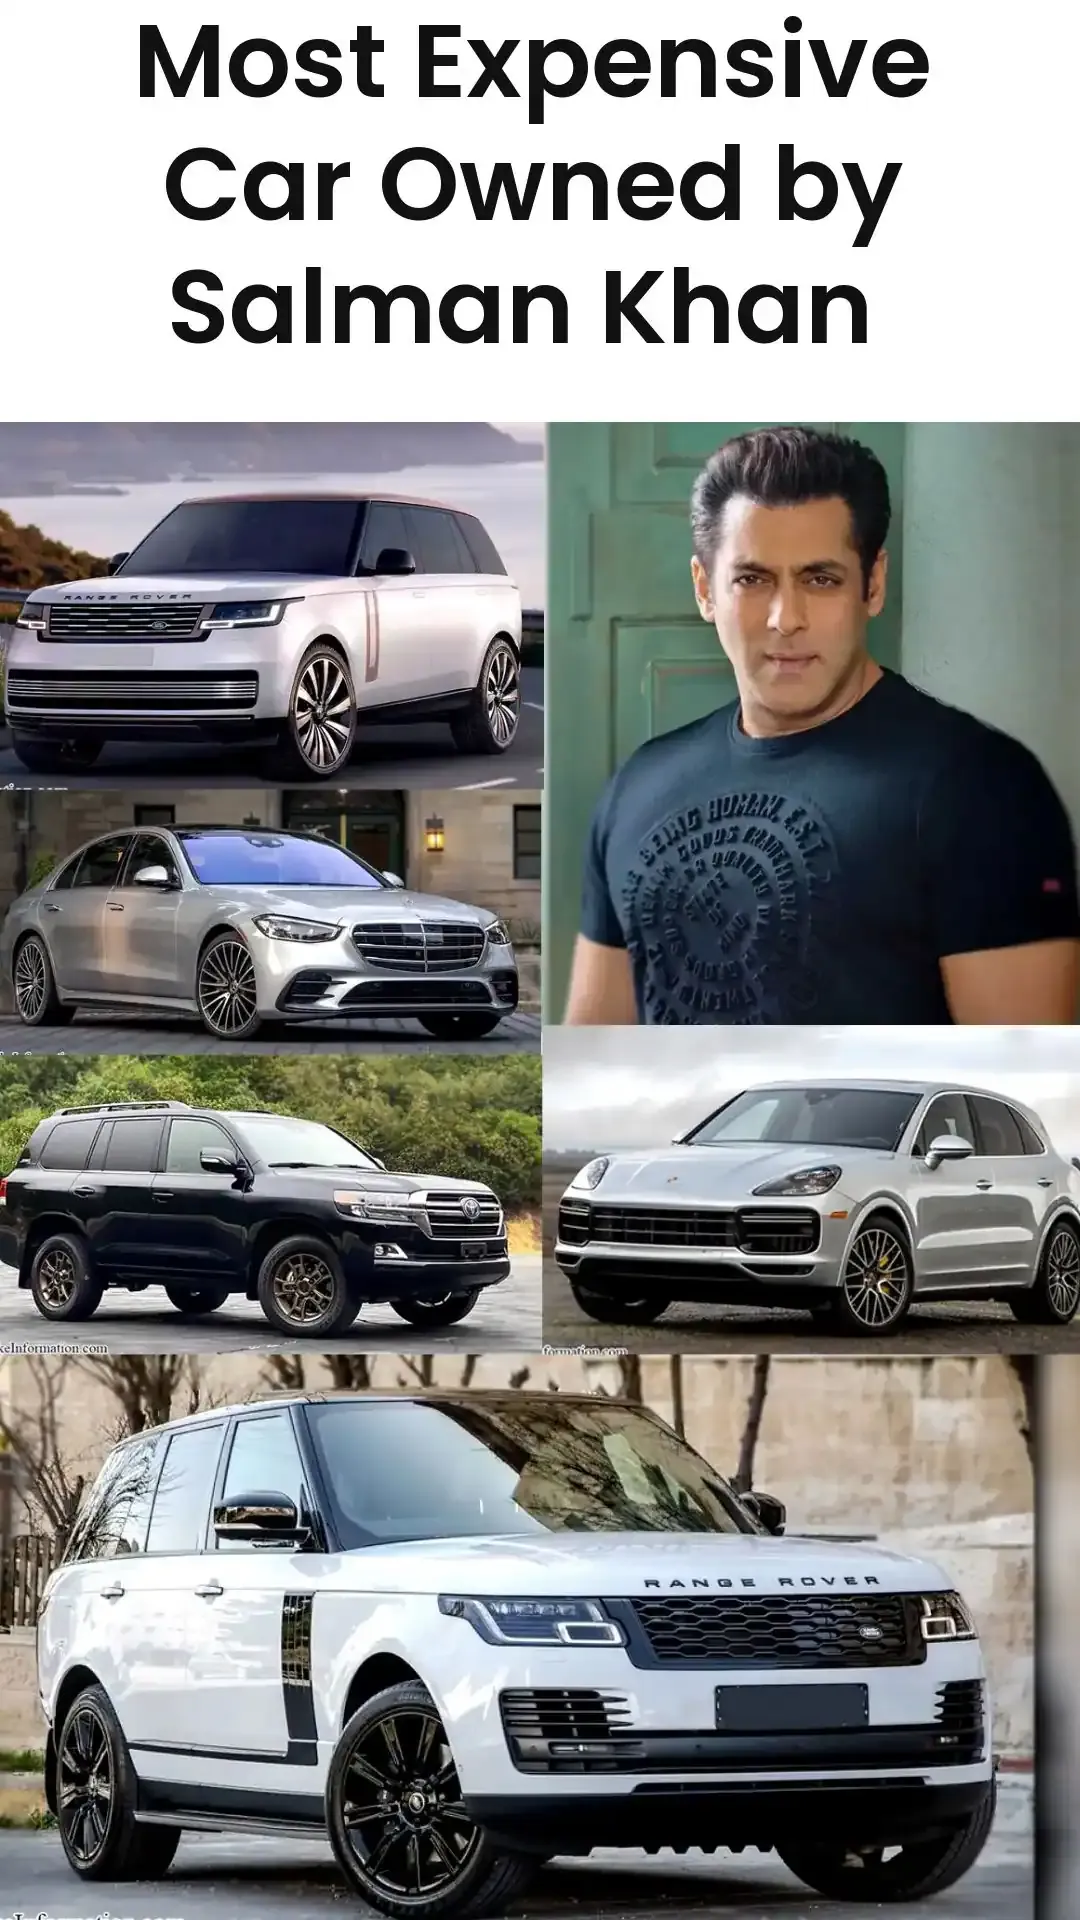 Most Expensive Car Owned by Salman Khan